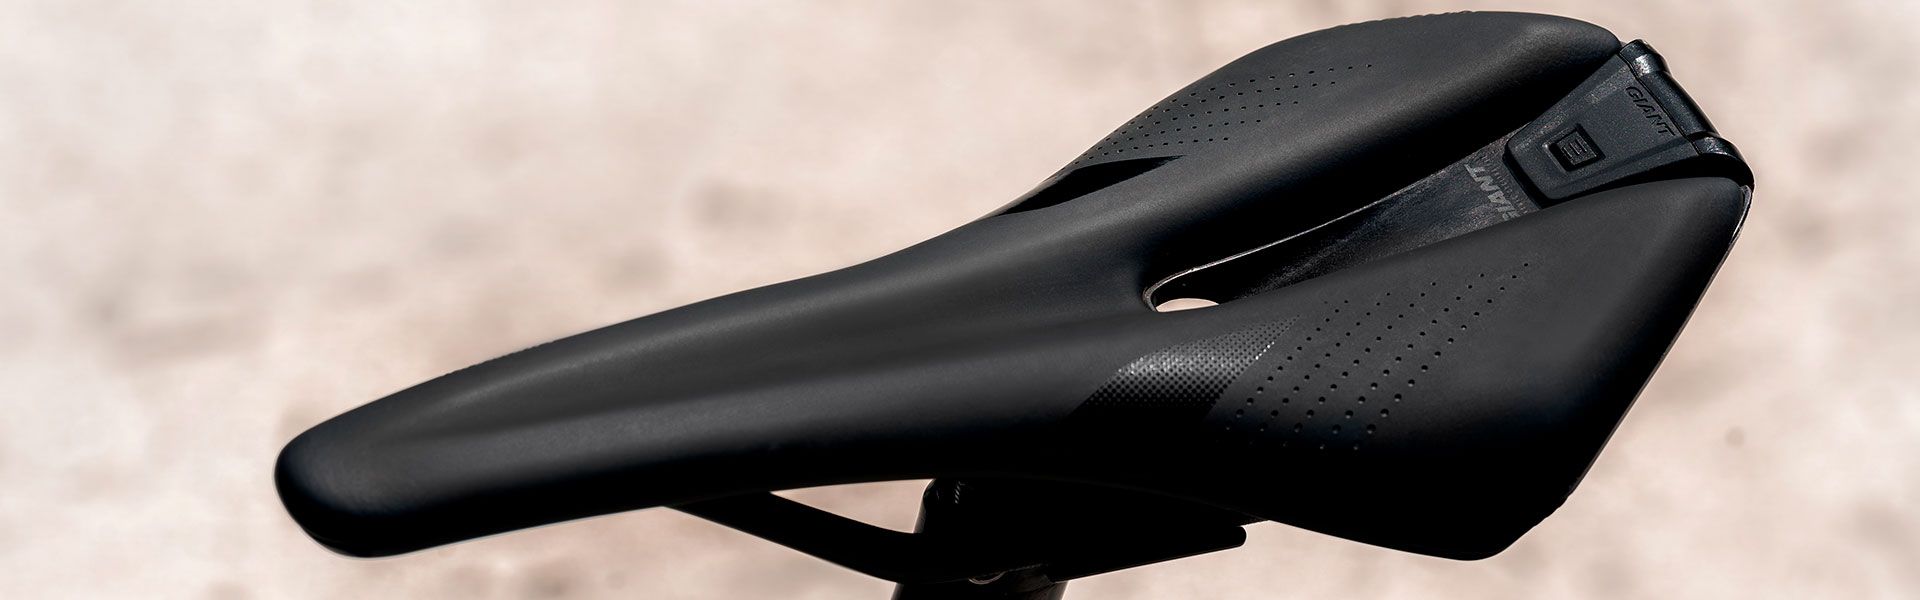 Saddles | Giant Bicycles Official site